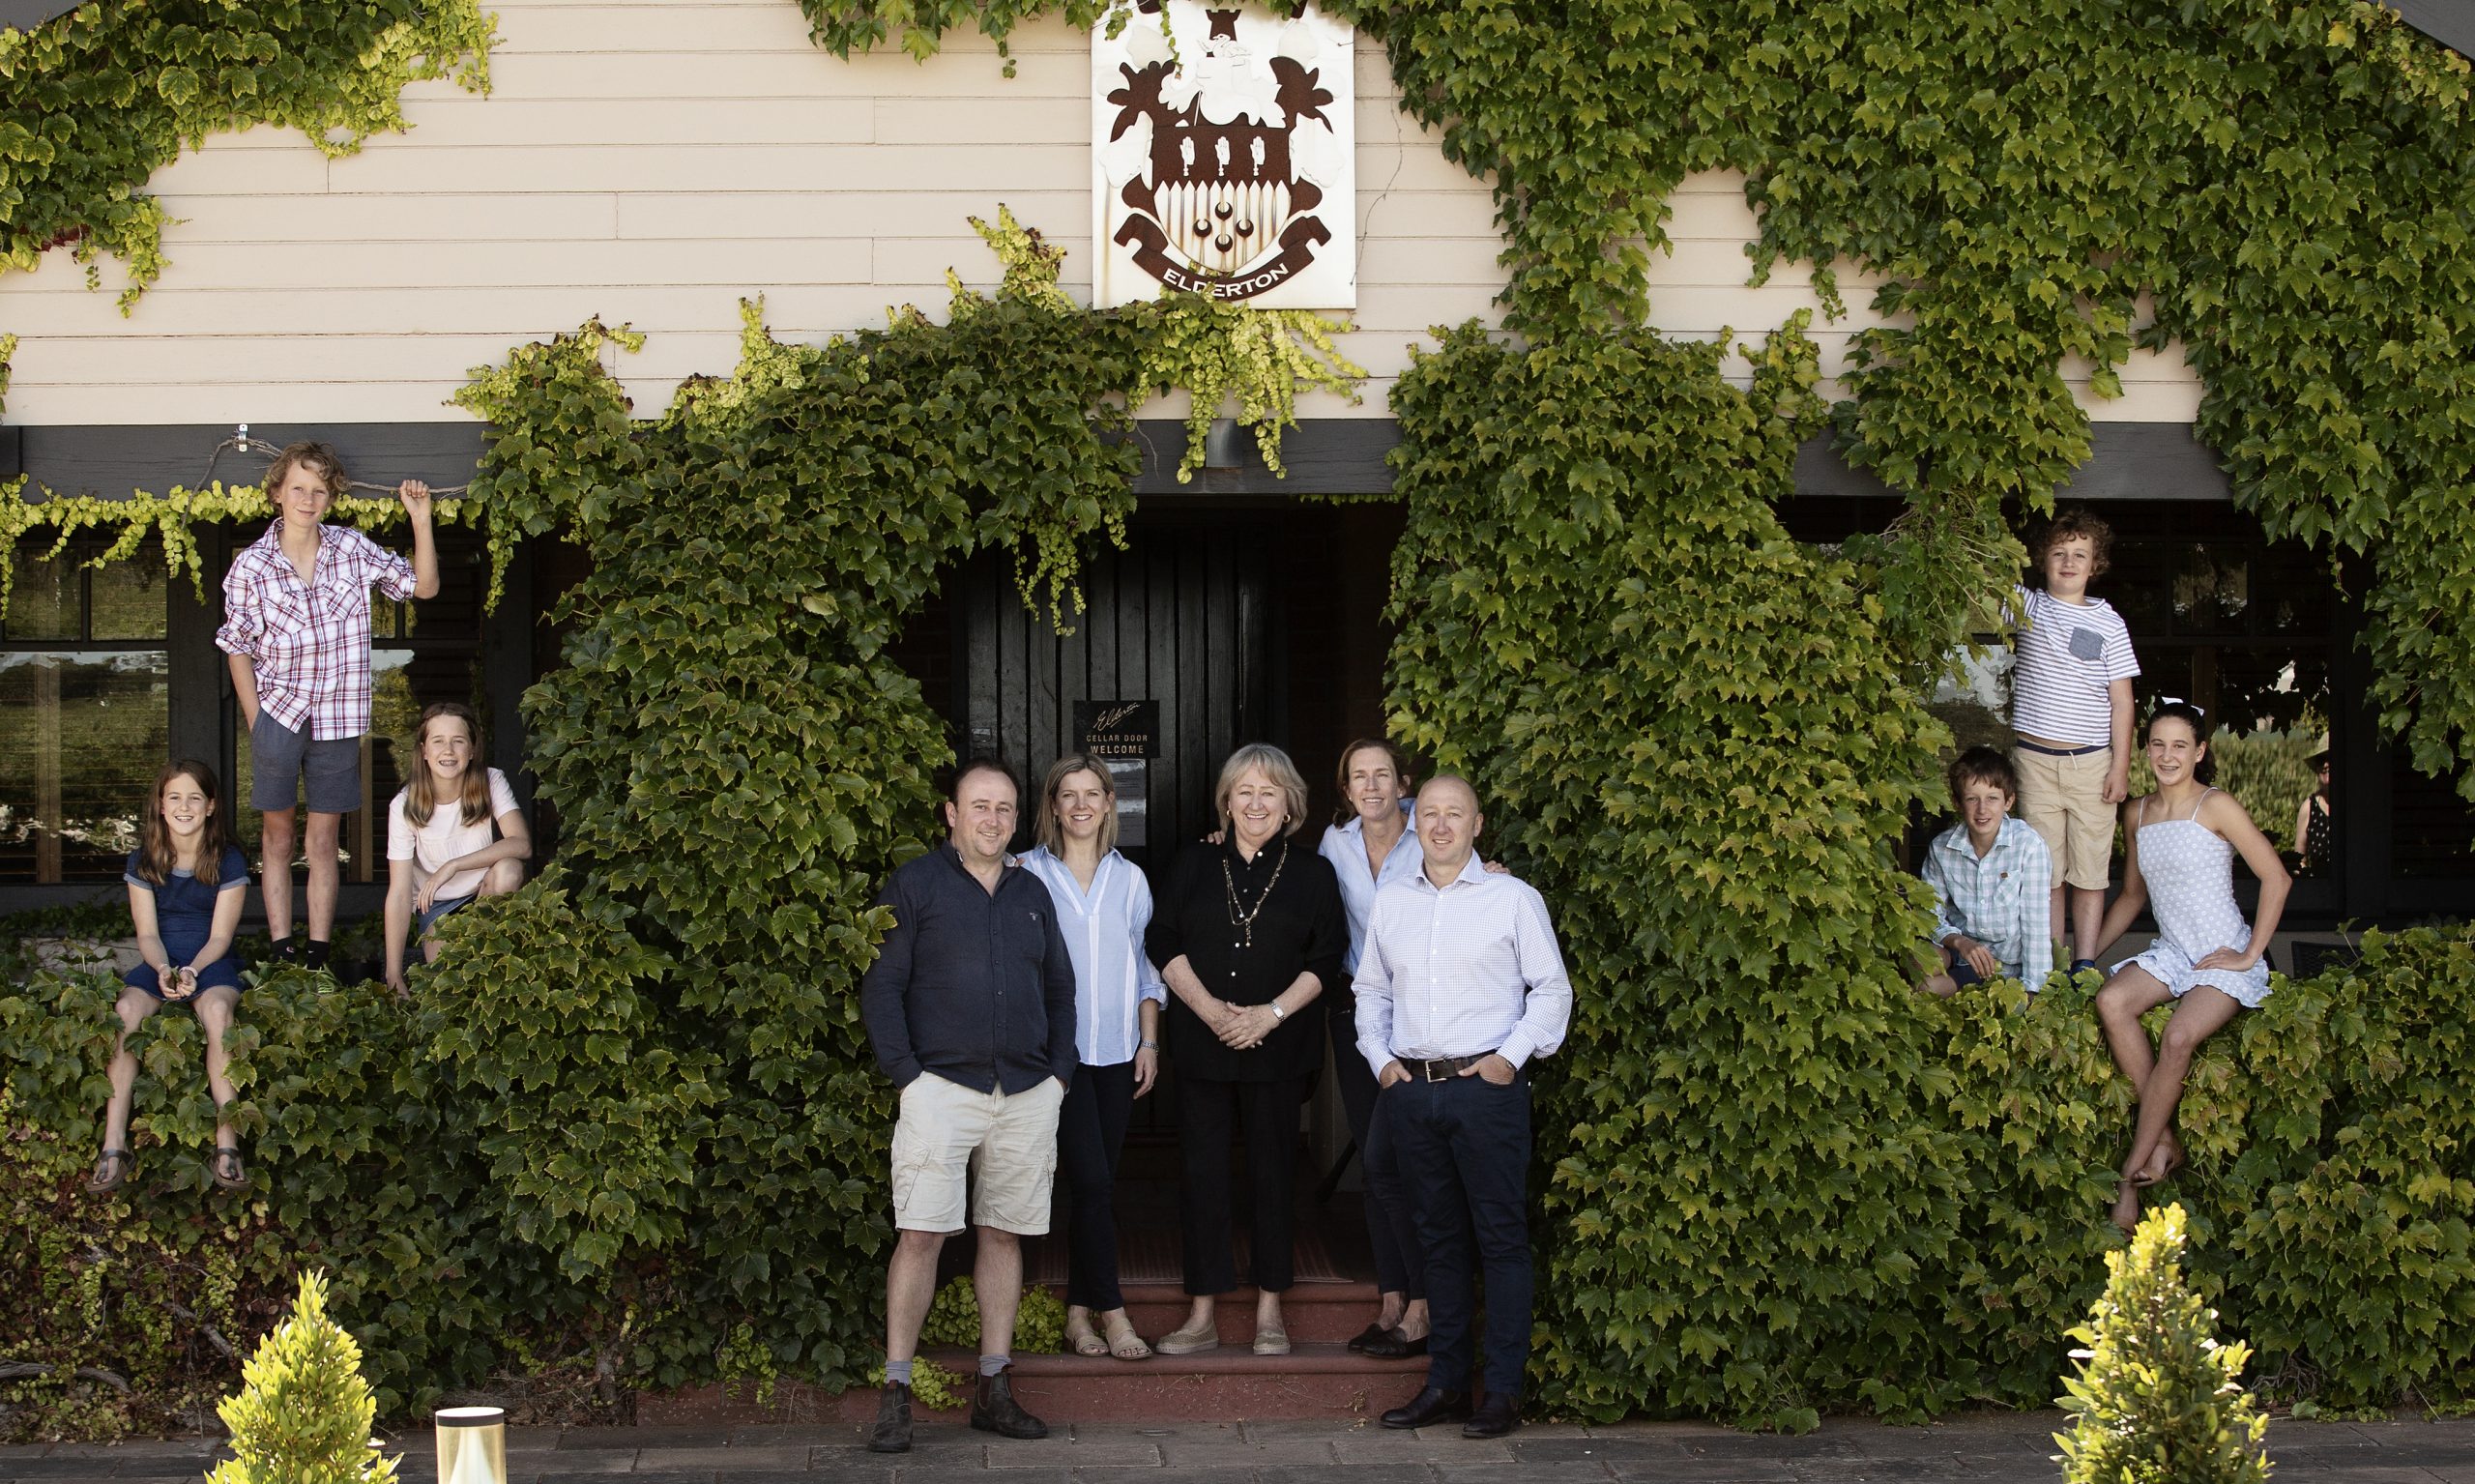 Ashmead family, owners of Elderton Wines Barossa Valley winery